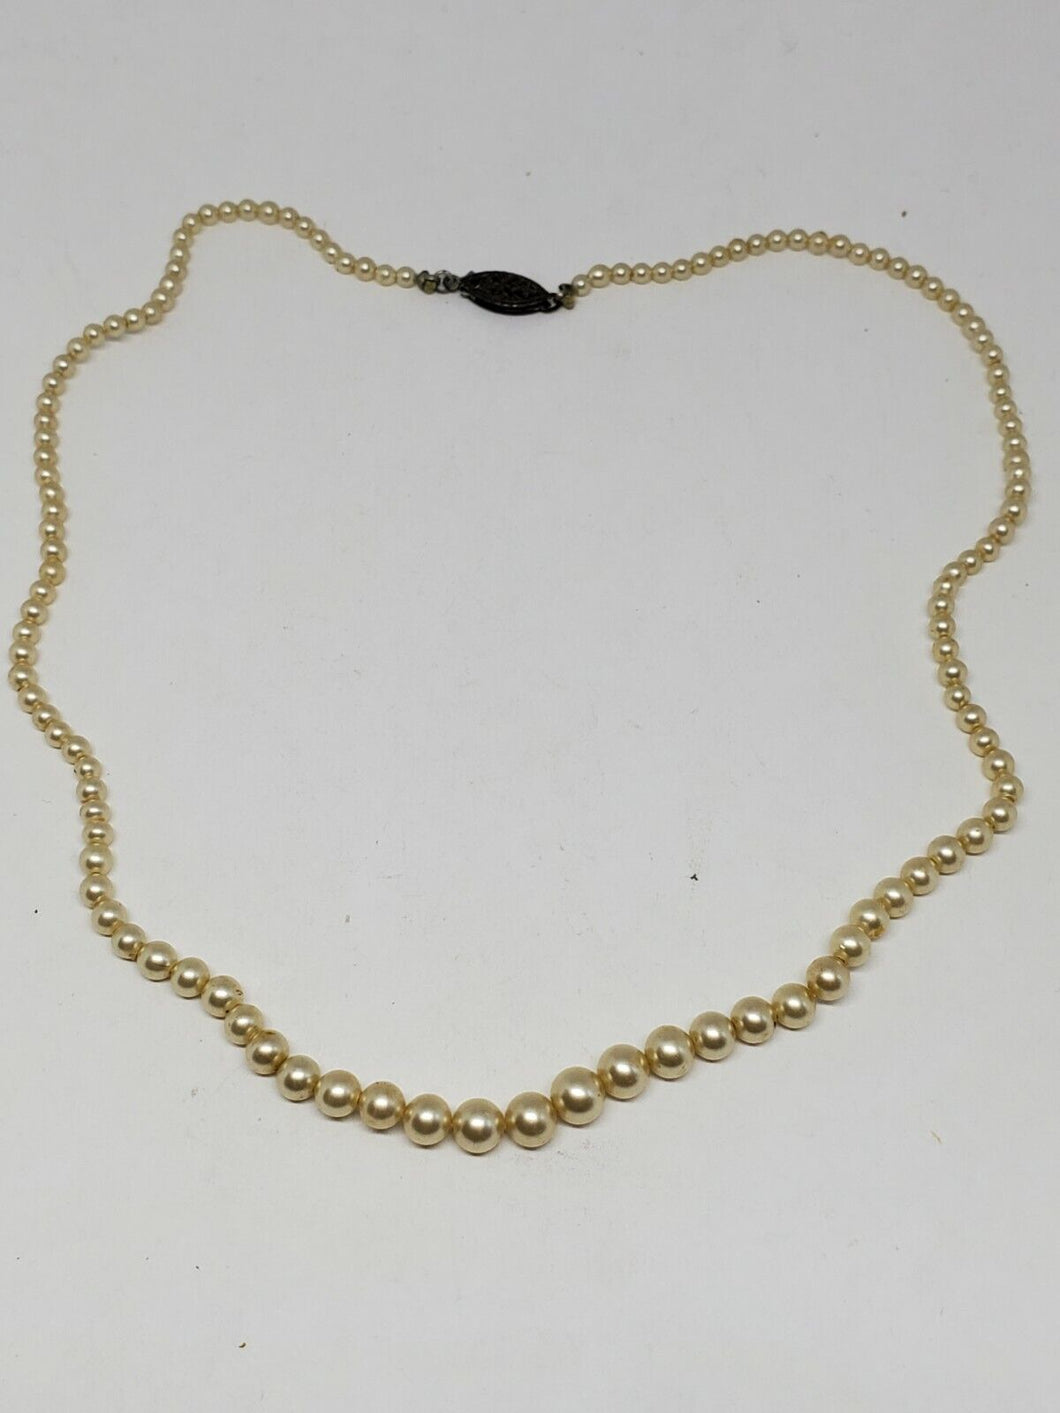 Vintage Sterling Silver Graduated Faux Pearl Necklace 16